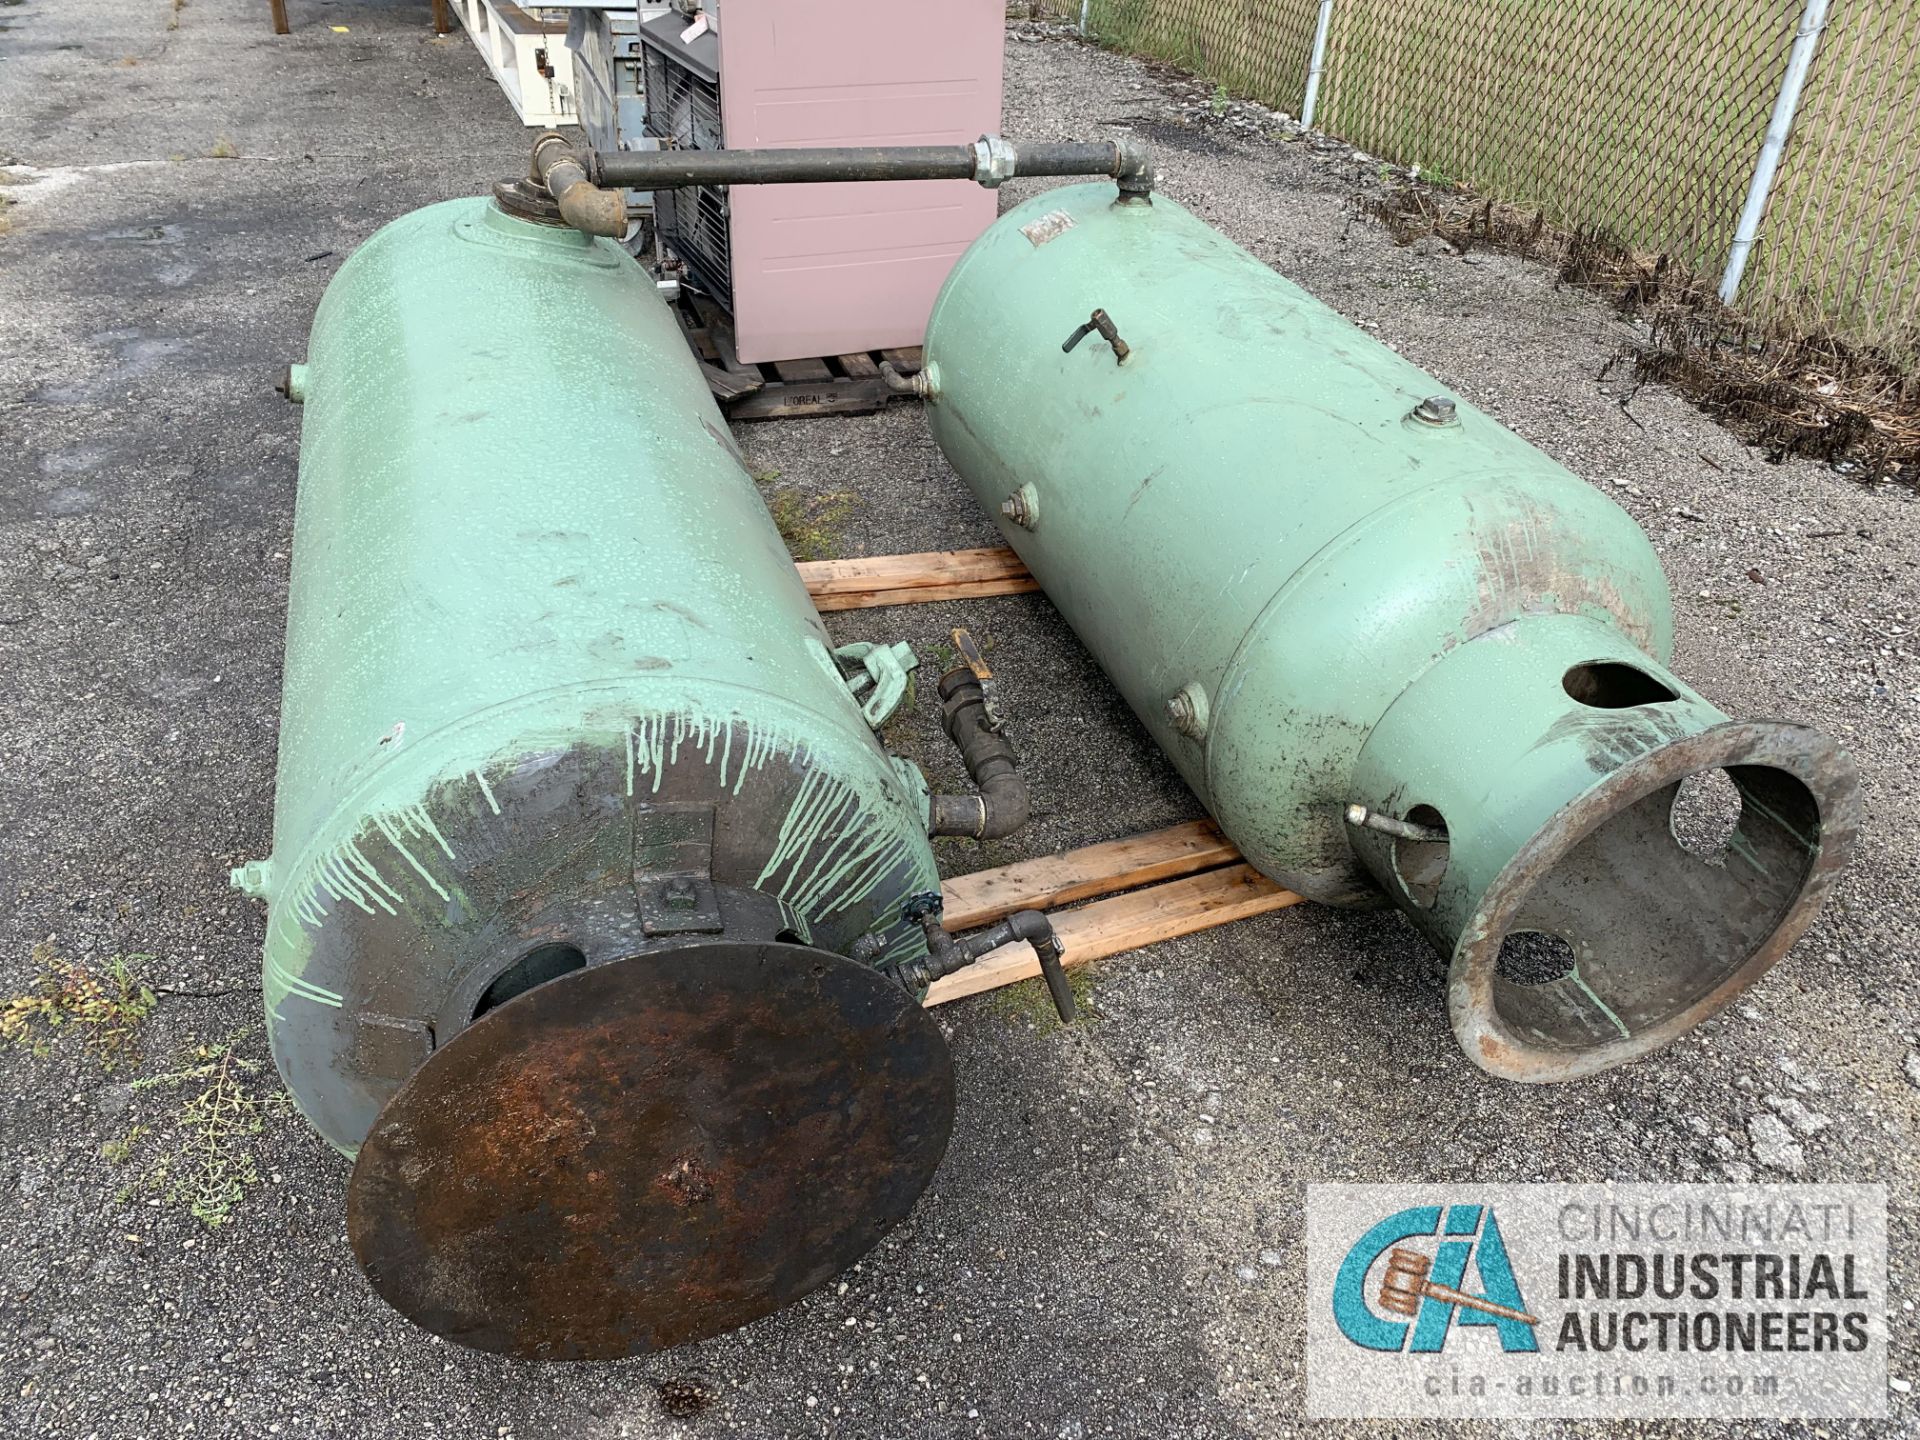 CHICAGO STEEL AIR TANK - $20.00 Rigging Fee Due to Onsite Rigger - Located in Holland, Ohio - Image 2 of 3